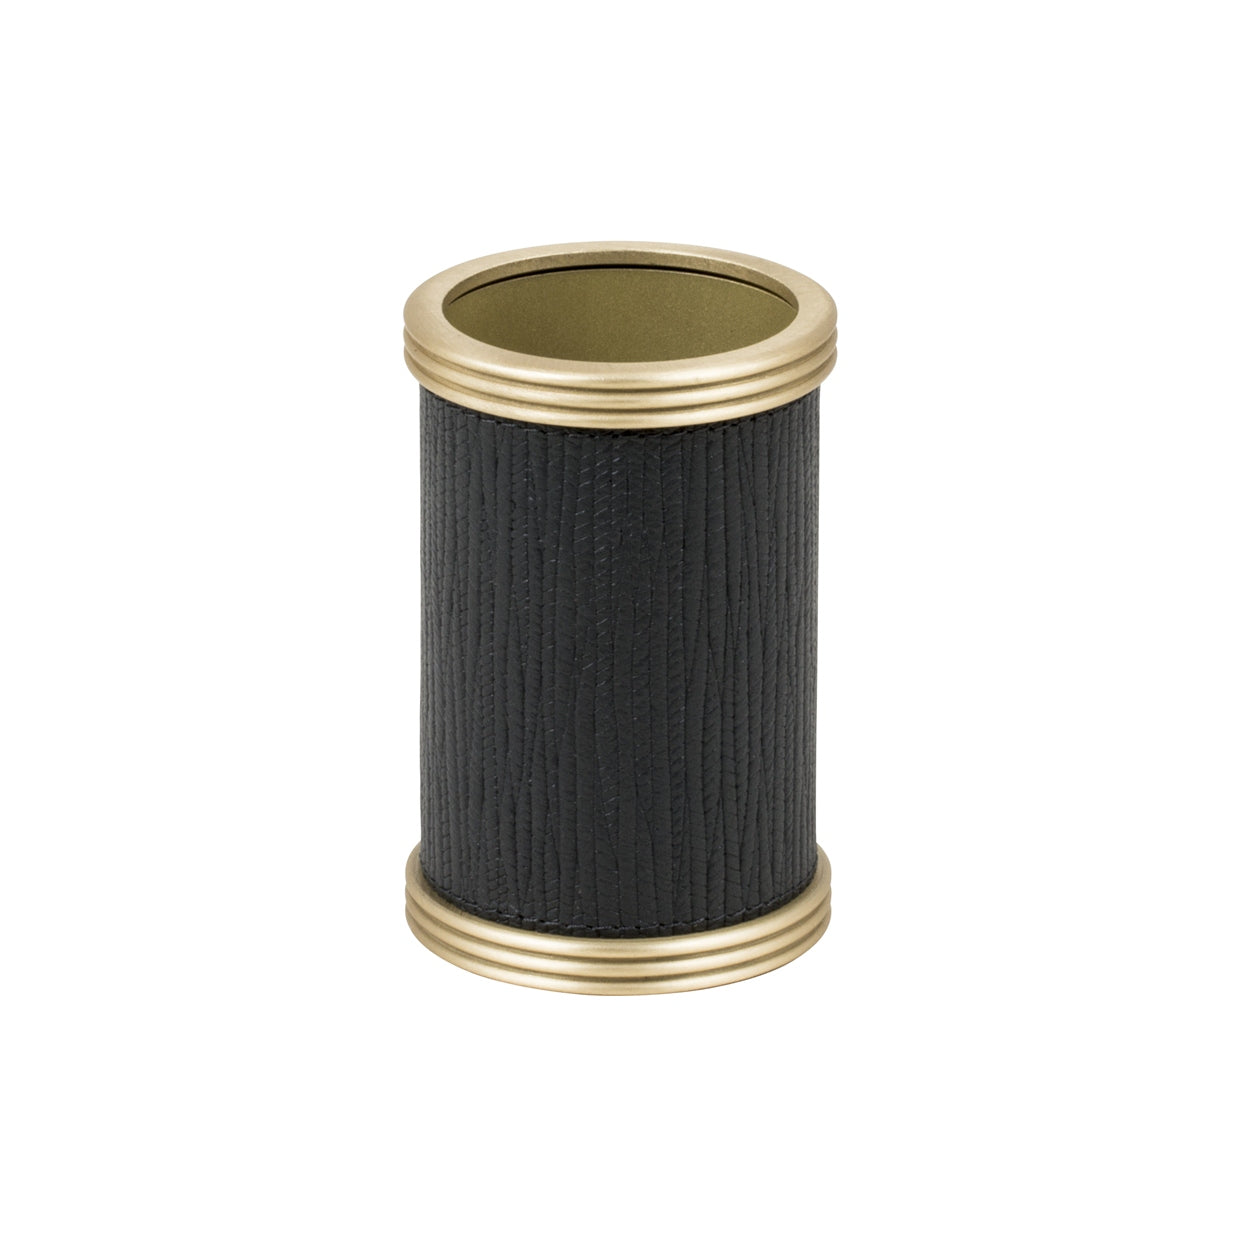 Giobagnara Amalfi Leather-Covered Brass Toothbrush Holder | Part of Amalfi Leather-Covered Brass Bathroom Set | Elegant Metal Design | Leather-Covered for a Luxurious Feel | Brass Base for Durability | Non-Slip Waterproof Rubber Base | Discover the Amalfi Collection at 2Jour Concierge, #1 luxury high-end gift & lifestyle shop